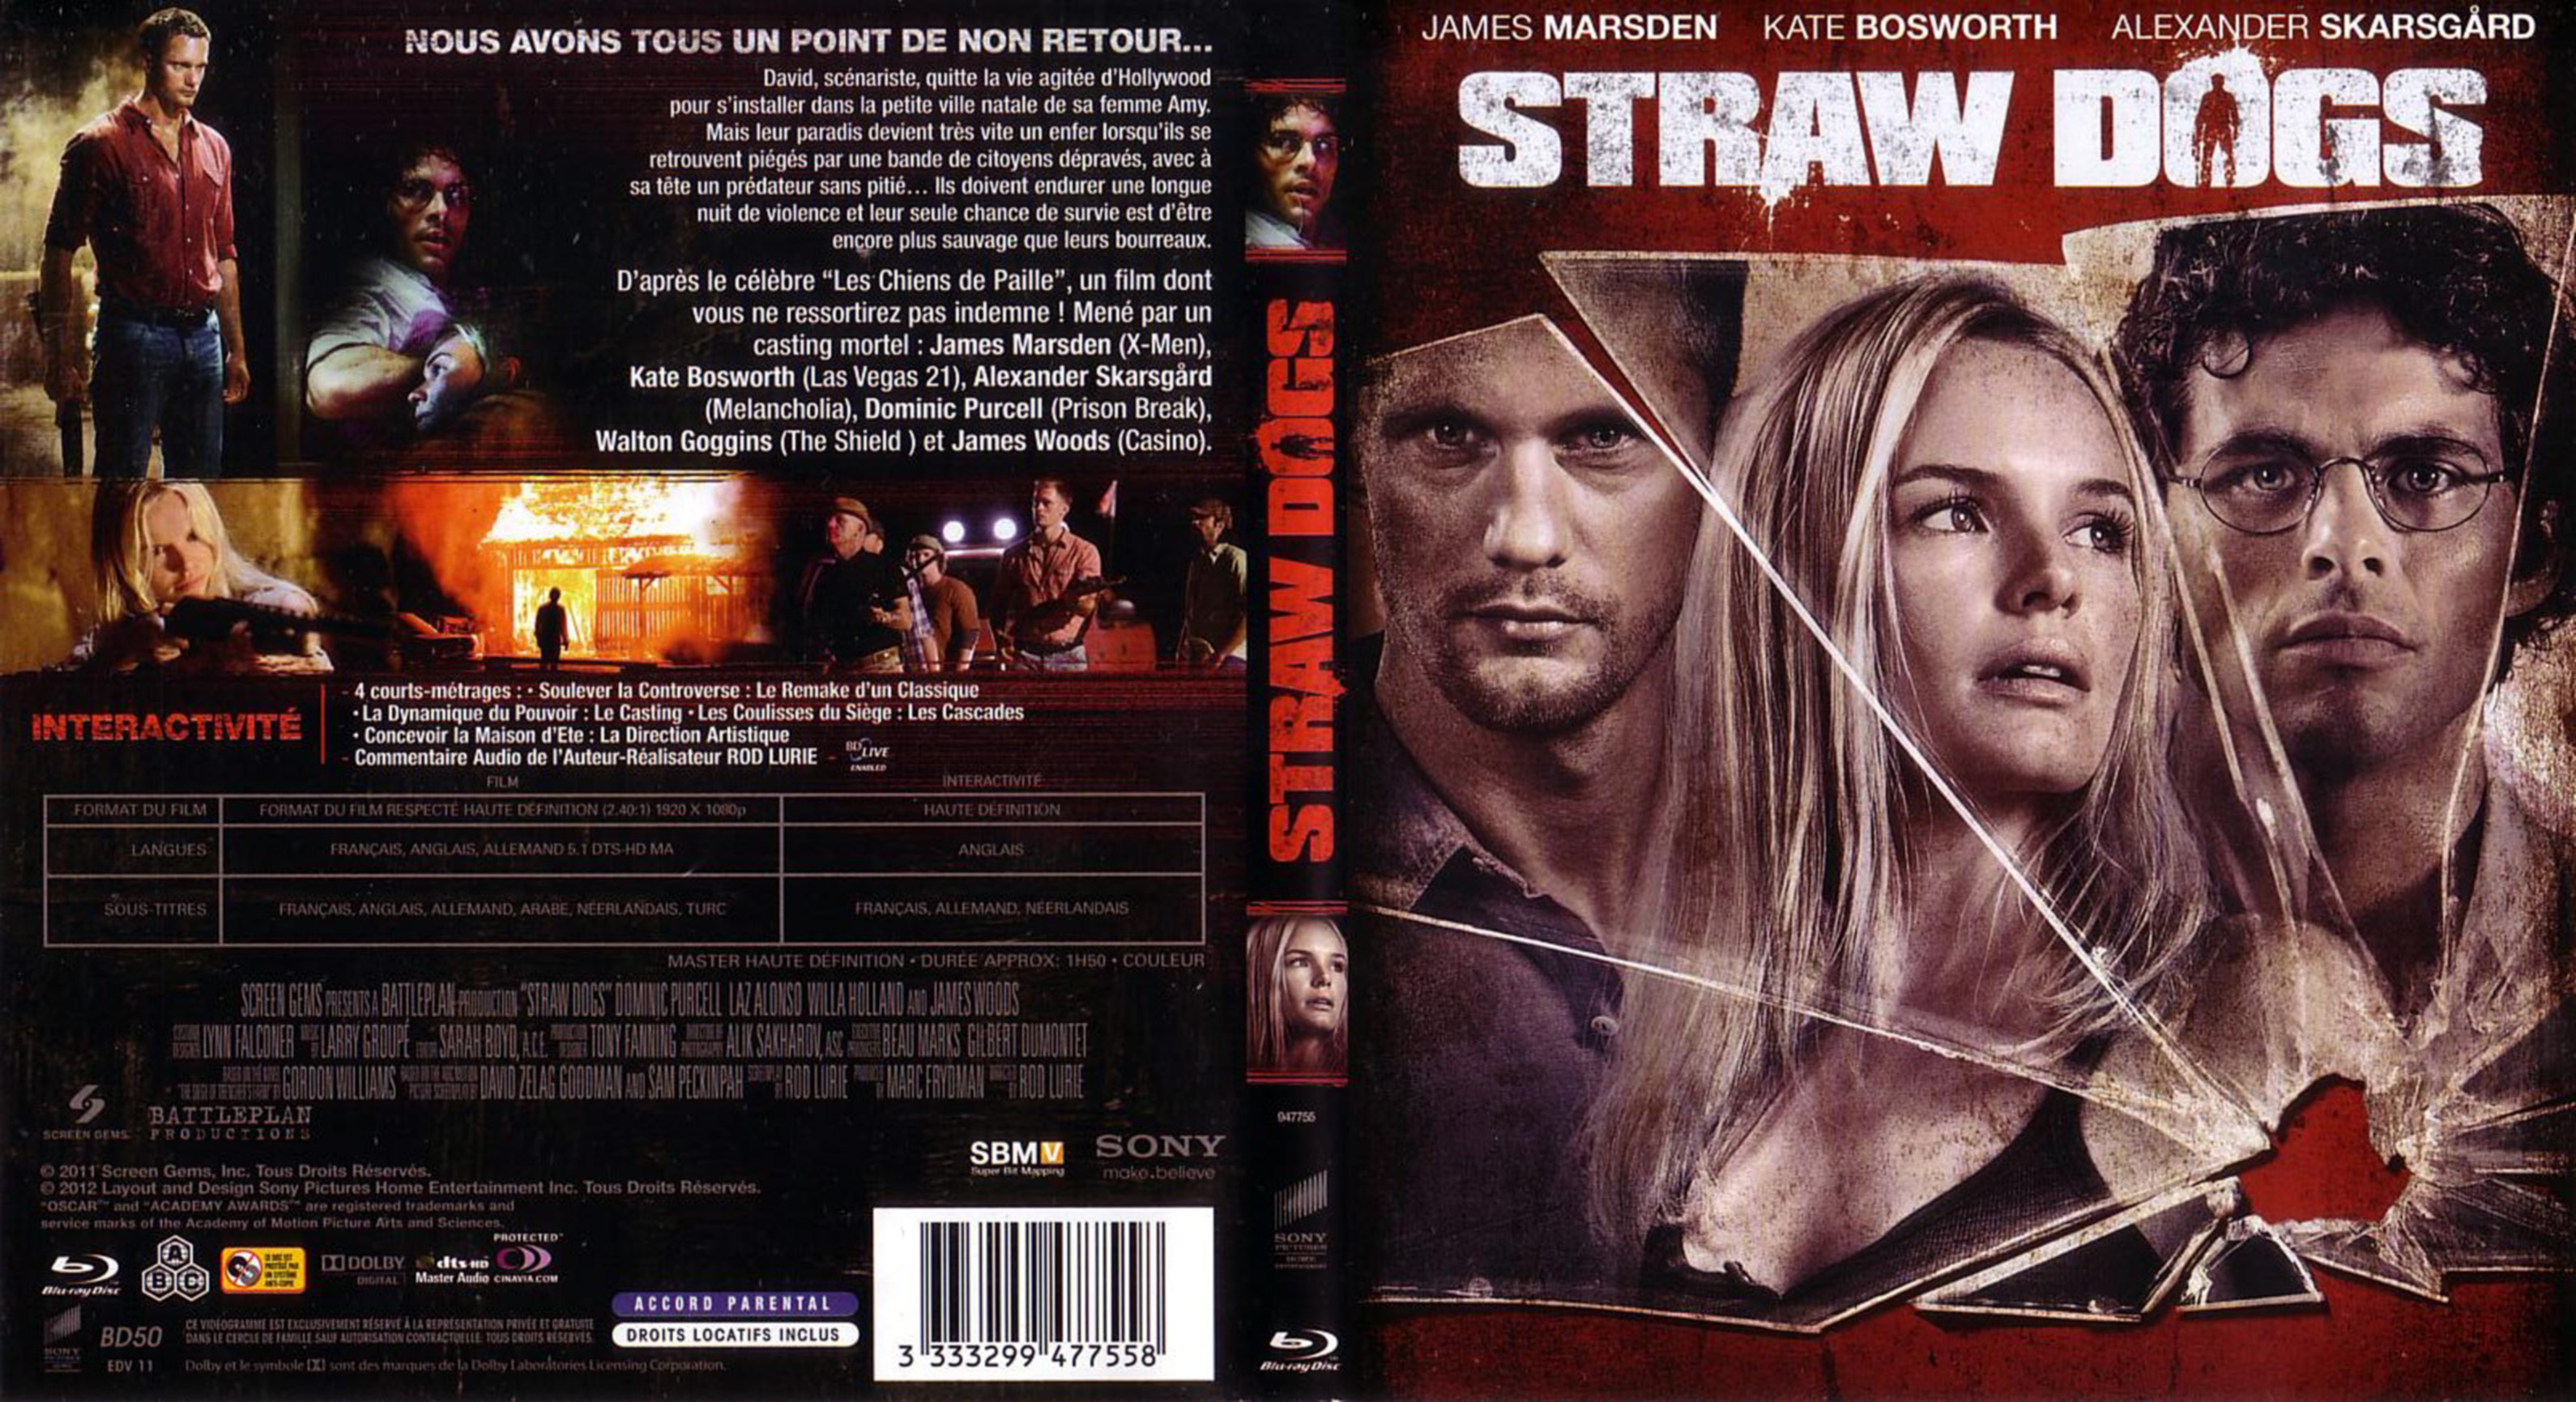 Jaquette DVD Straw Dogs (2011) (BLU-RAY)